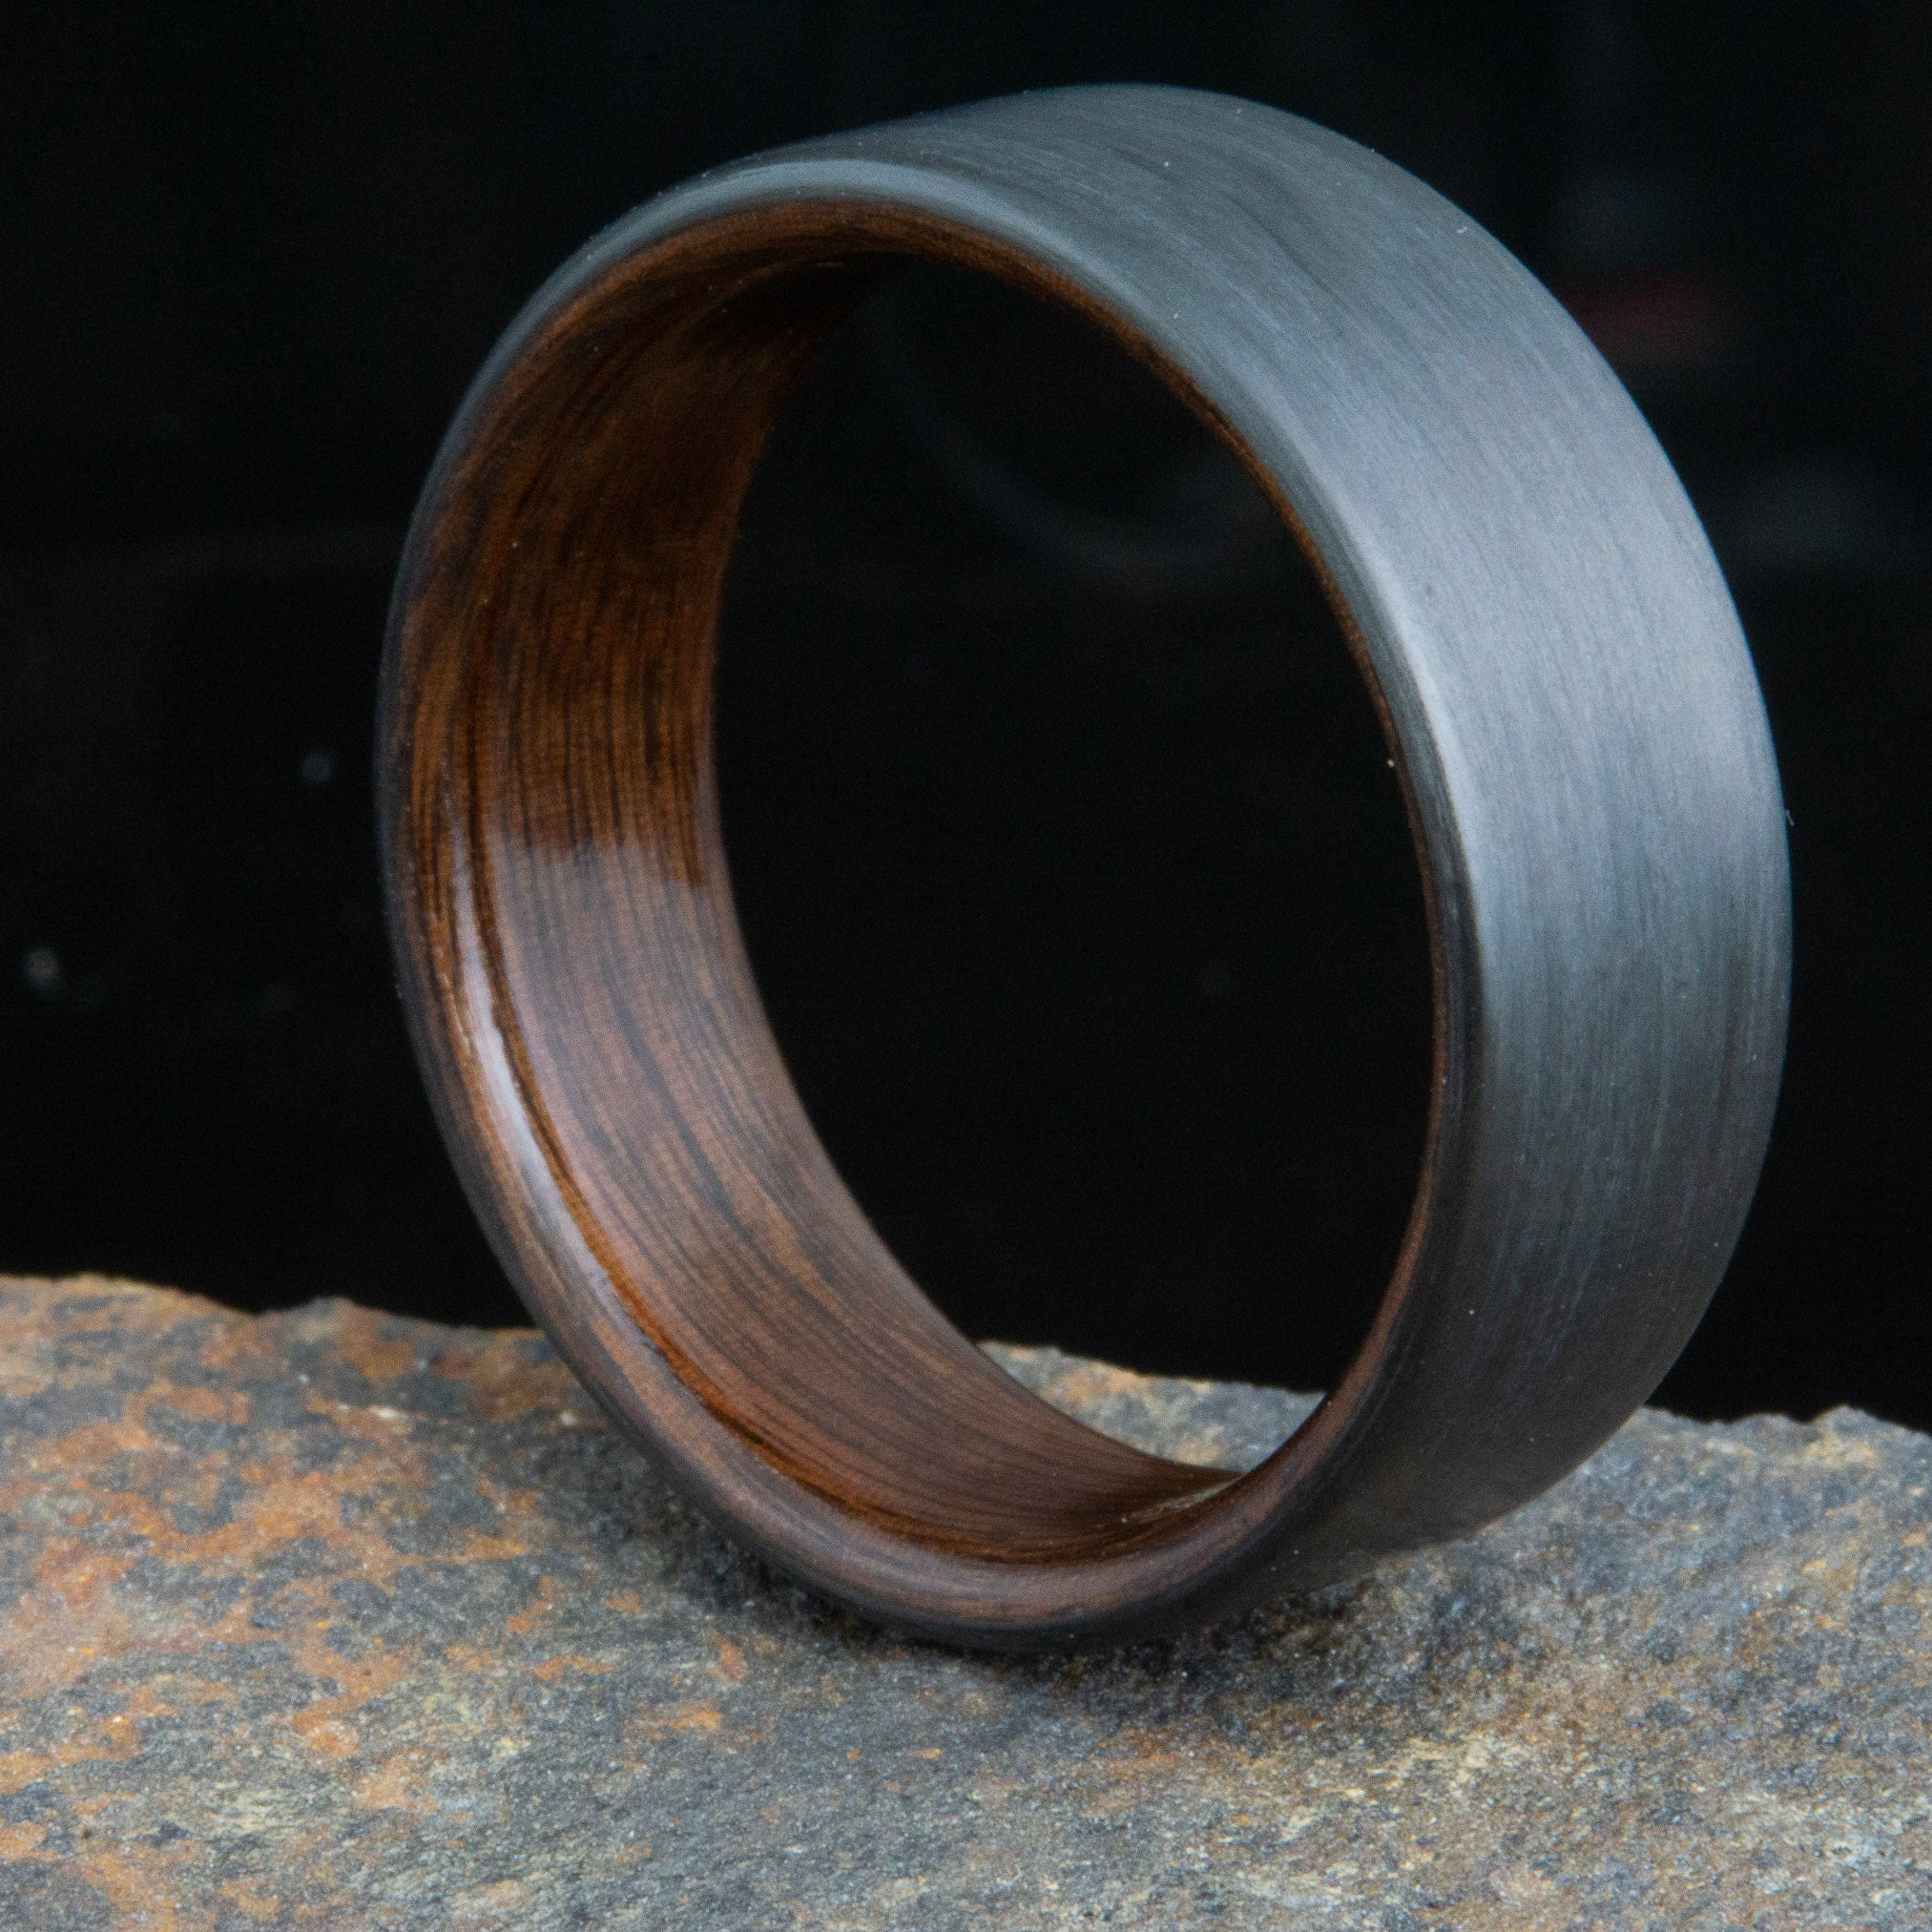 "The Gibs" Carbon fiber mens ring with Rosewood interior